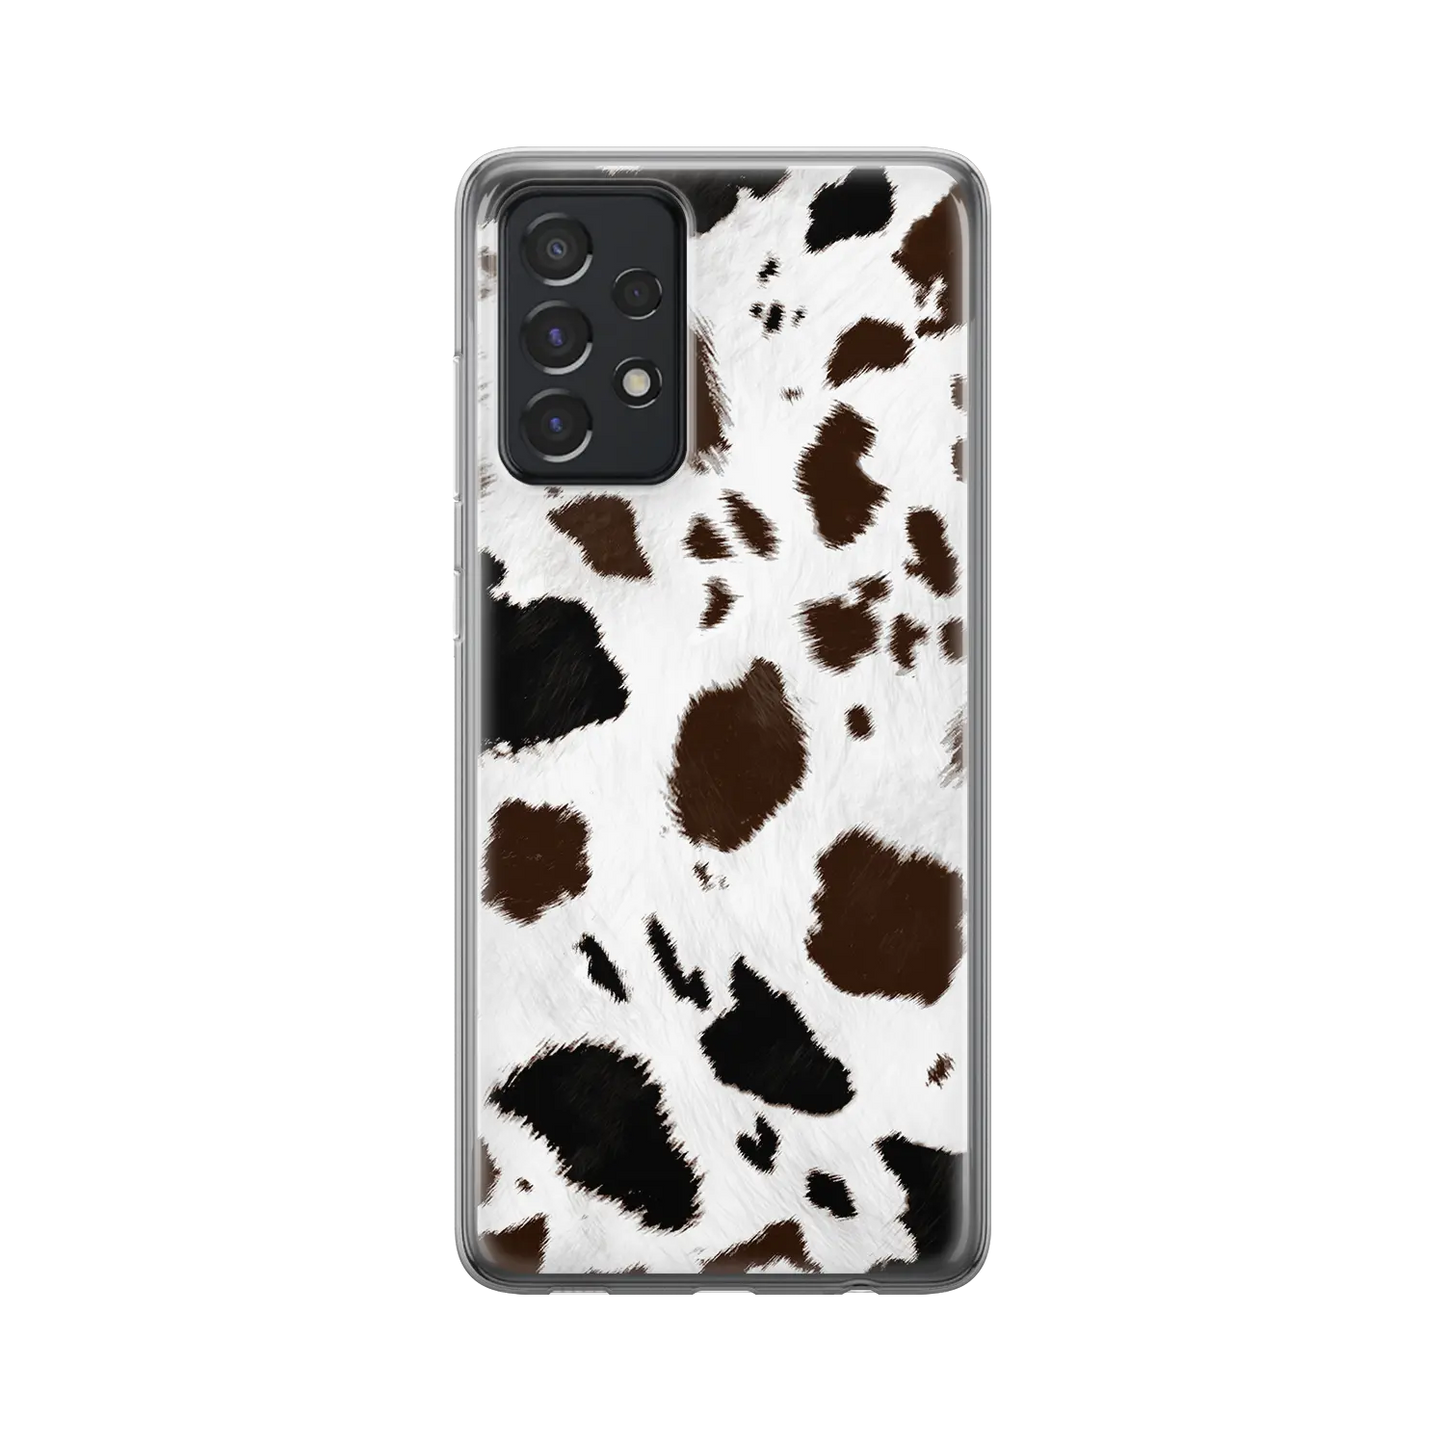 Moo Print - Personalised Galaxy A Case